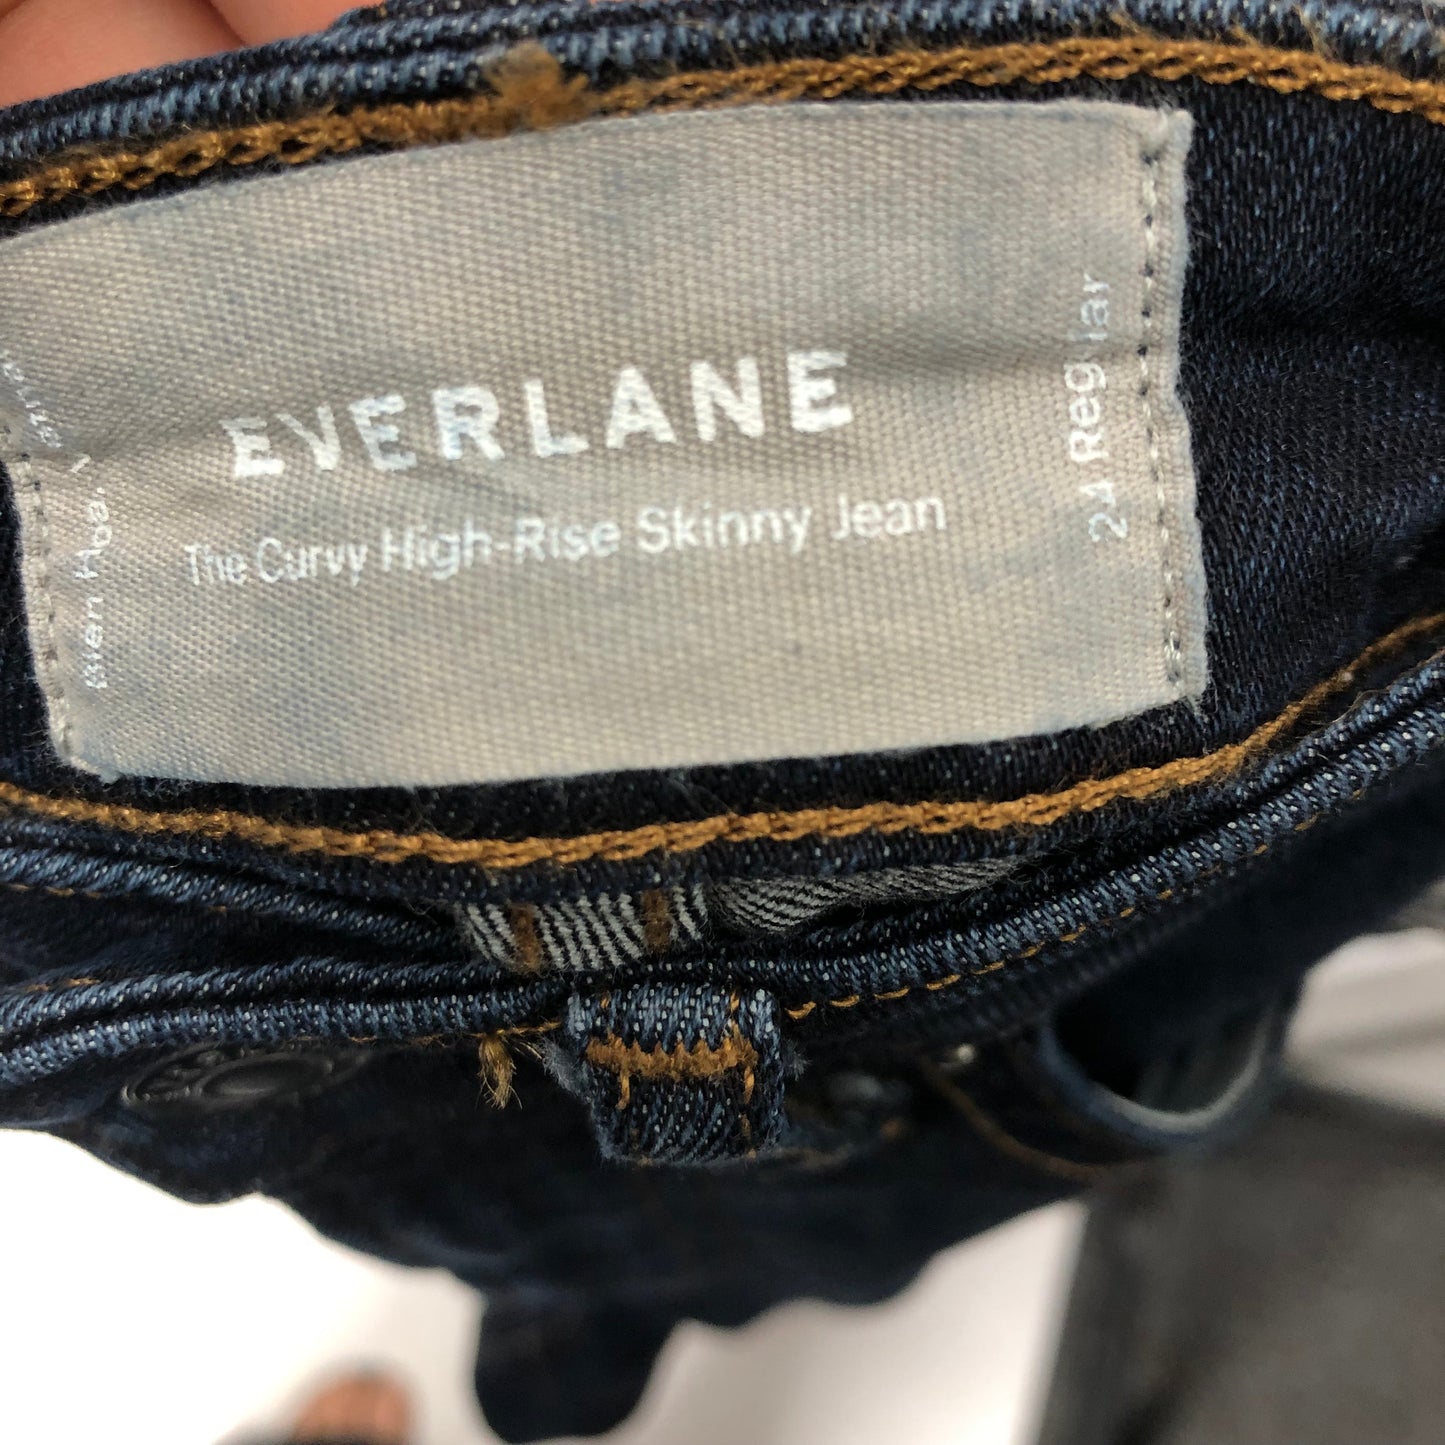 Jeans Skinny By Everlane  Size: 0